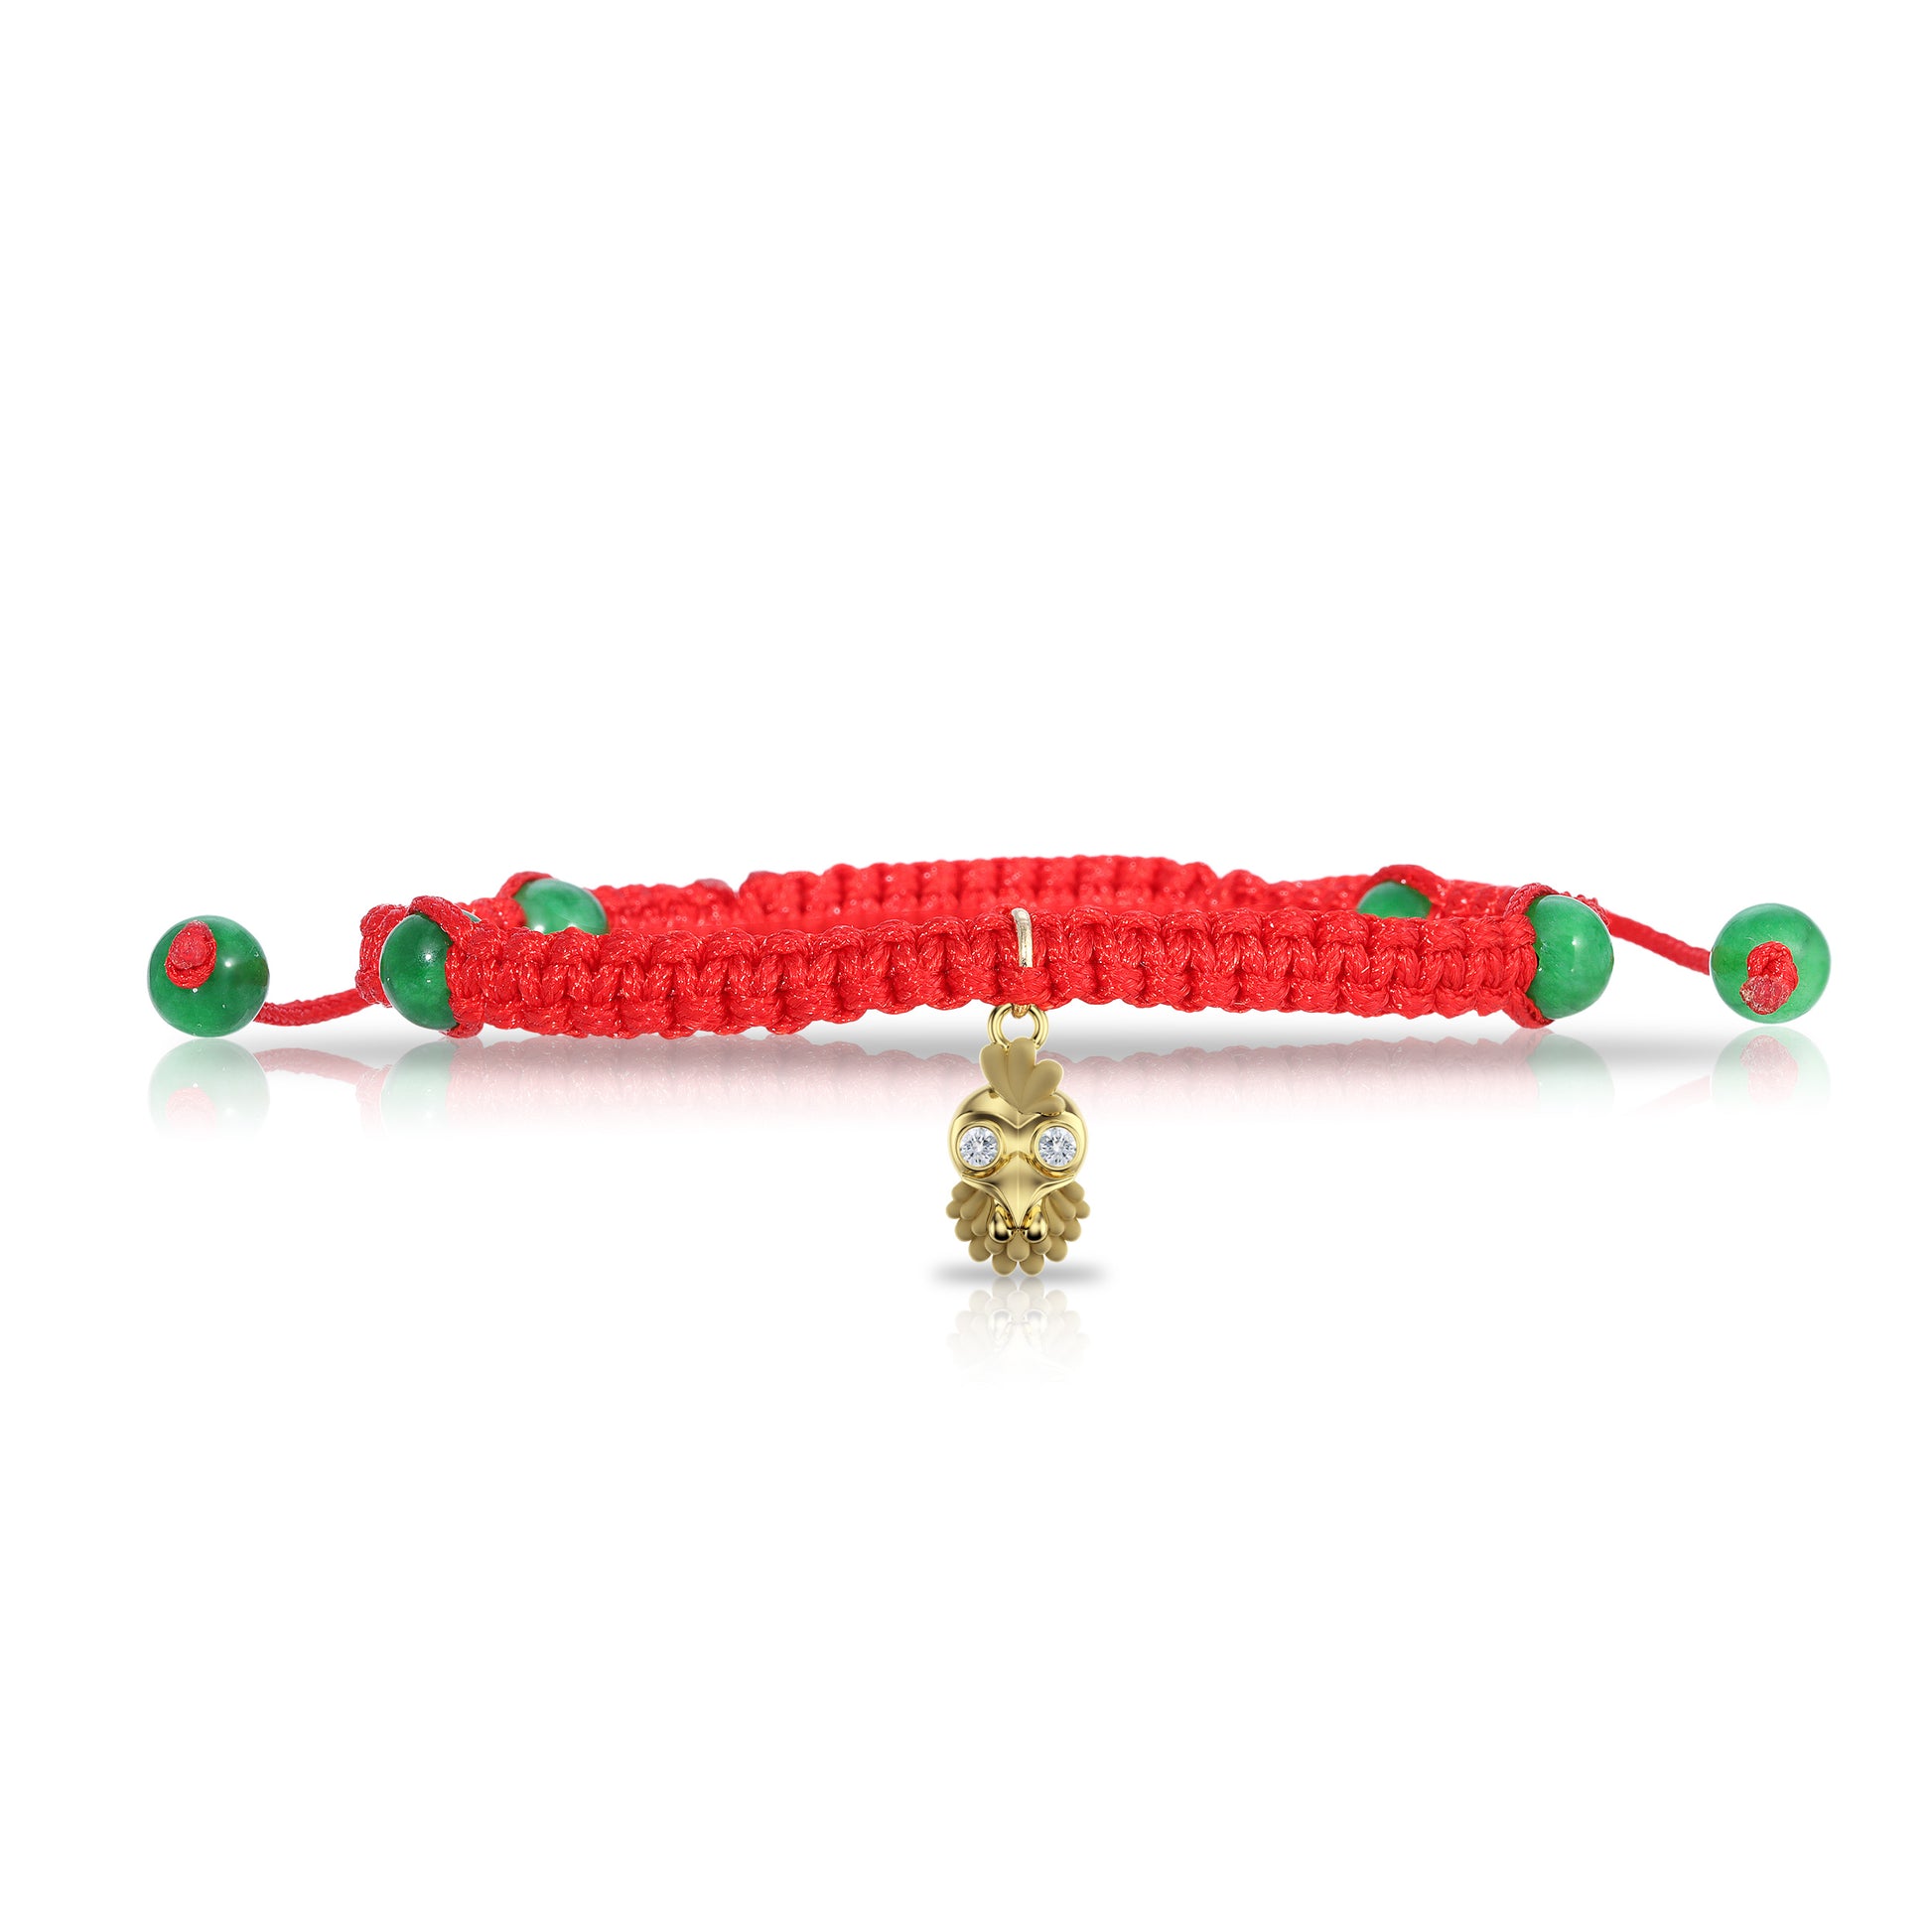 Bracelet with Rooster Charm (Render)